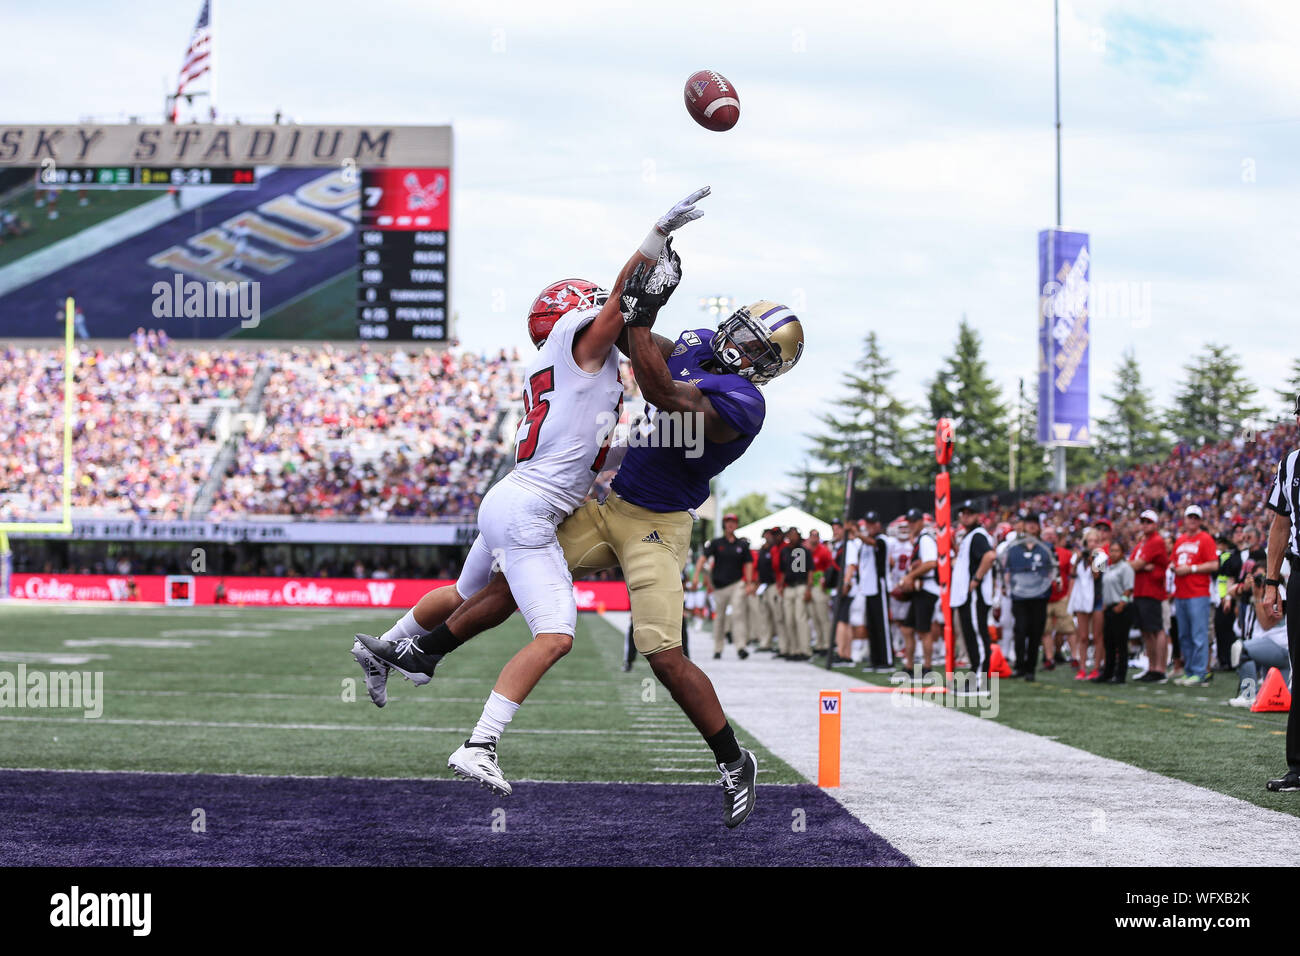 august-31-2019-eastern-washington-eagles-safety-calin-criner-25-bats-the-ball-away-from-washington-huskies-wide-receiver-chico-mcclatcher-6-during-a-game-between-the-eastern-washington-eagles-and-washington-huskies-at-alaska-airlines-field-at-husky-stadium-in-seattle-wa-the-huskies-won-47-14-sean-browncsm-WFXB2K.jpg